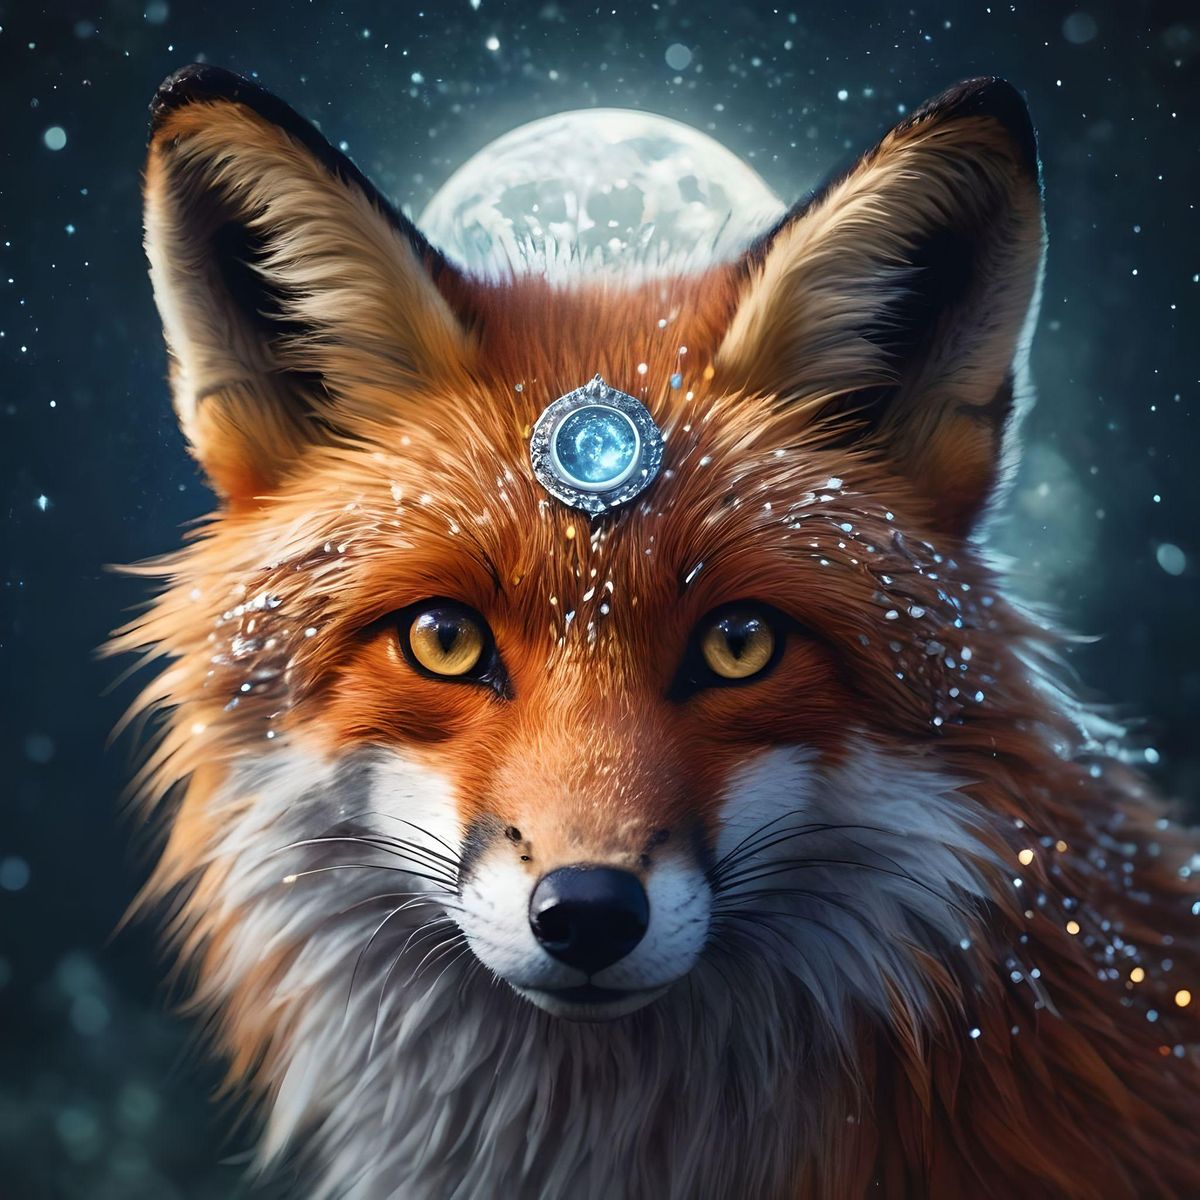 sparkling, magical fox with a moon symbol on its forehead is standing in the night, illuminating light